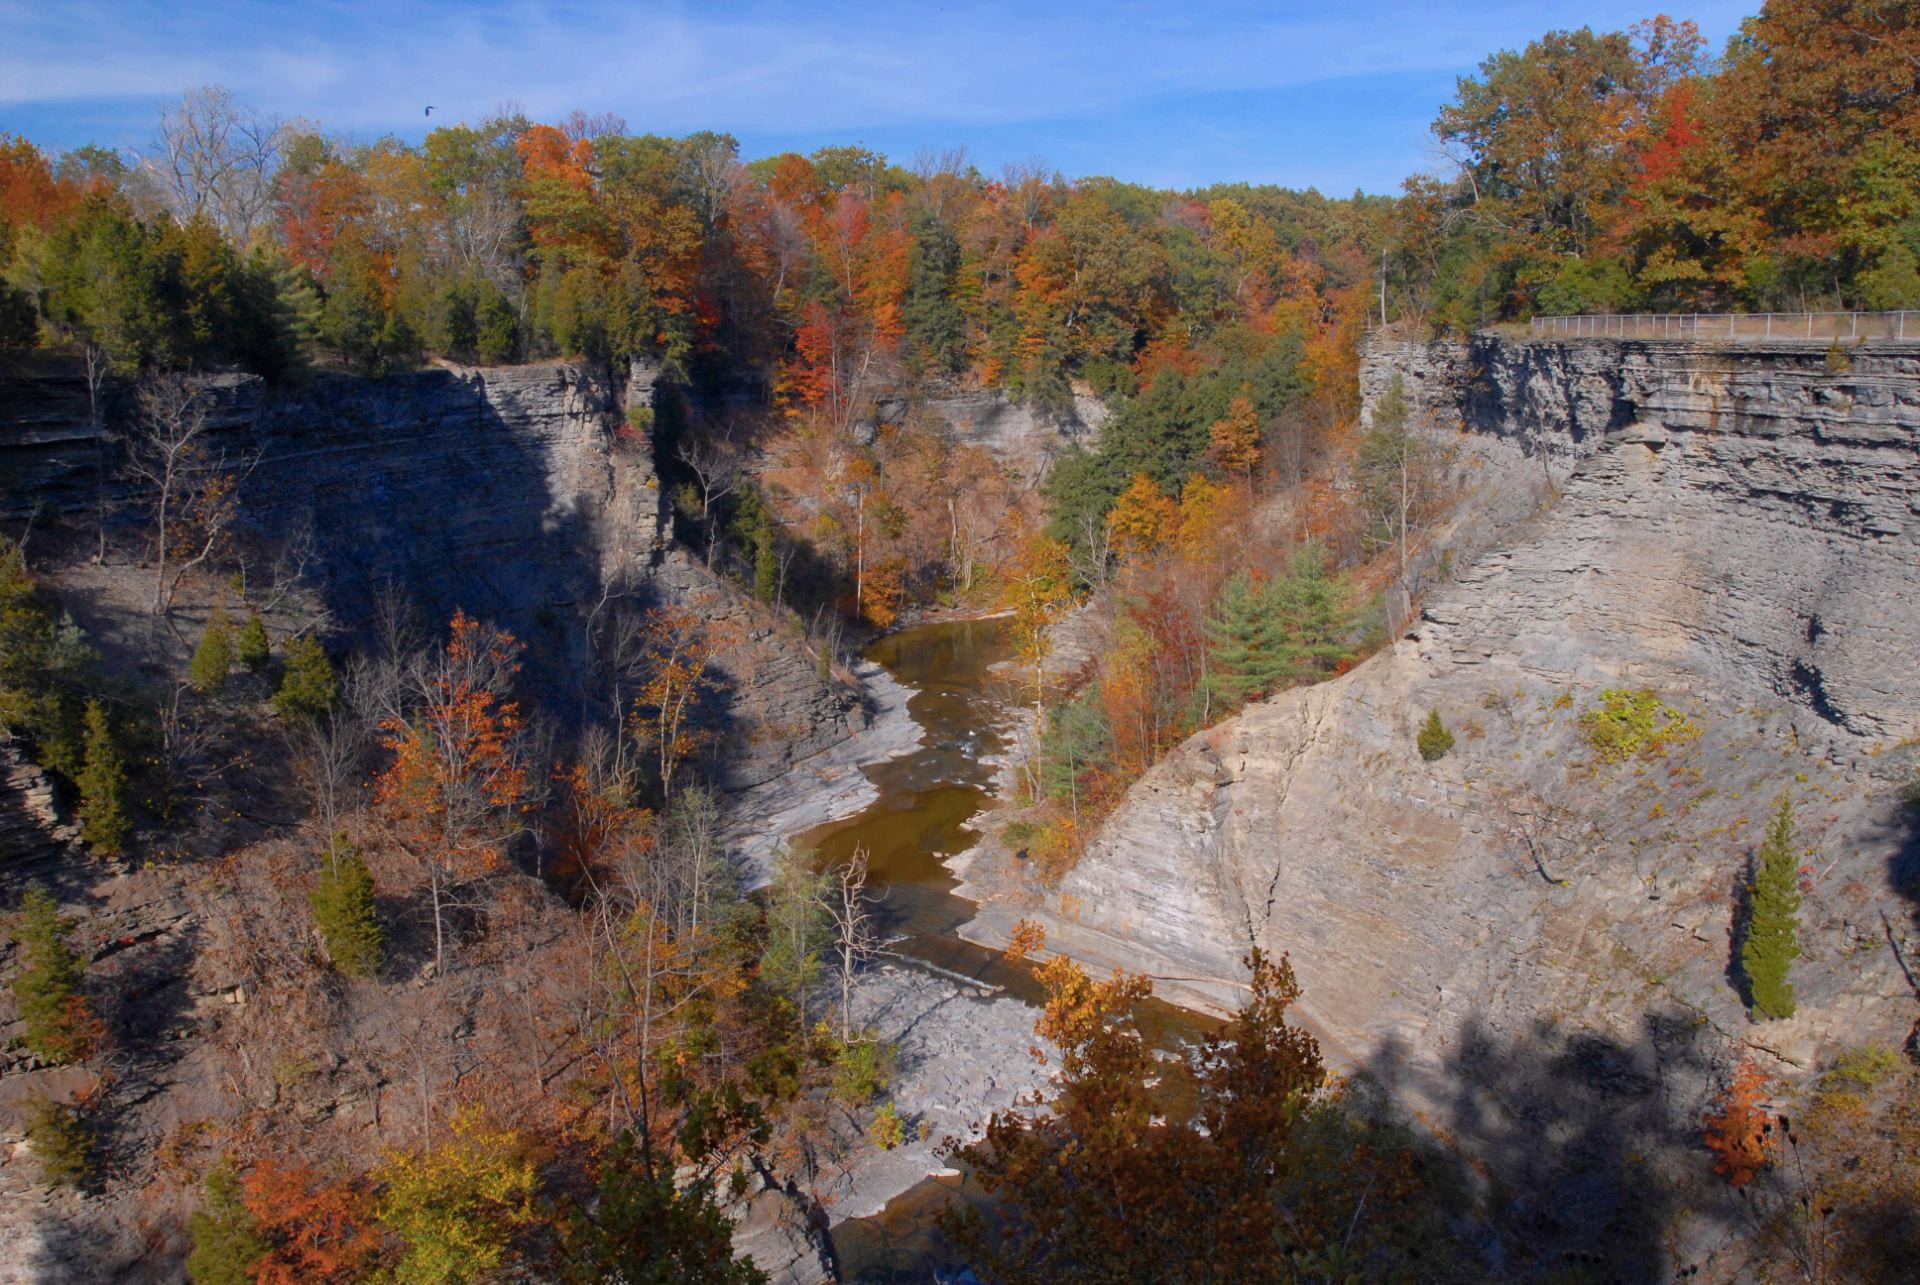 Photo of a hiking trail at Taughannock Falls park, with a winding gorge river and multicolored fall trees